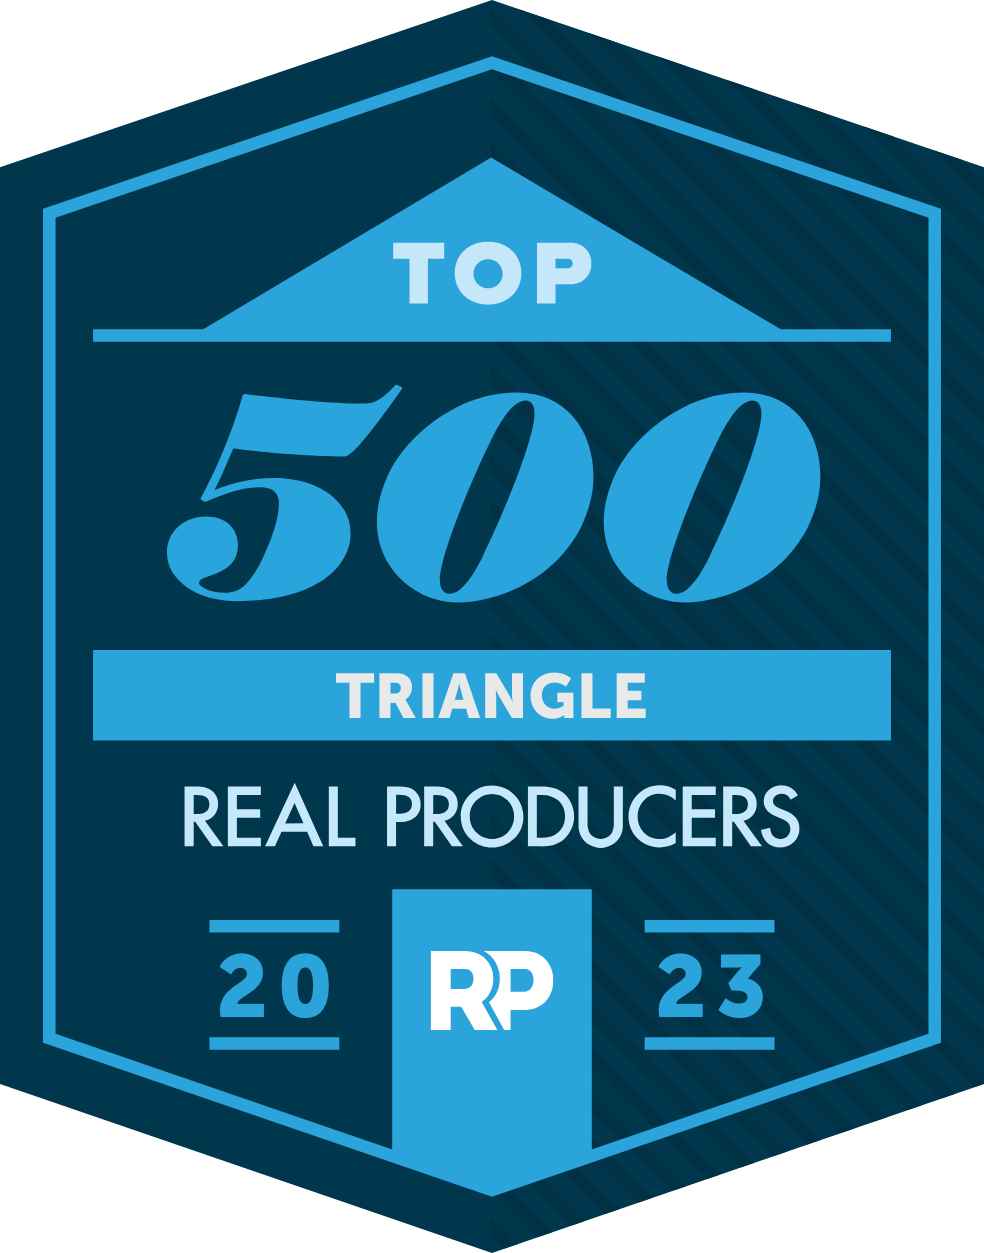 Top 500 Triangle Real Producers